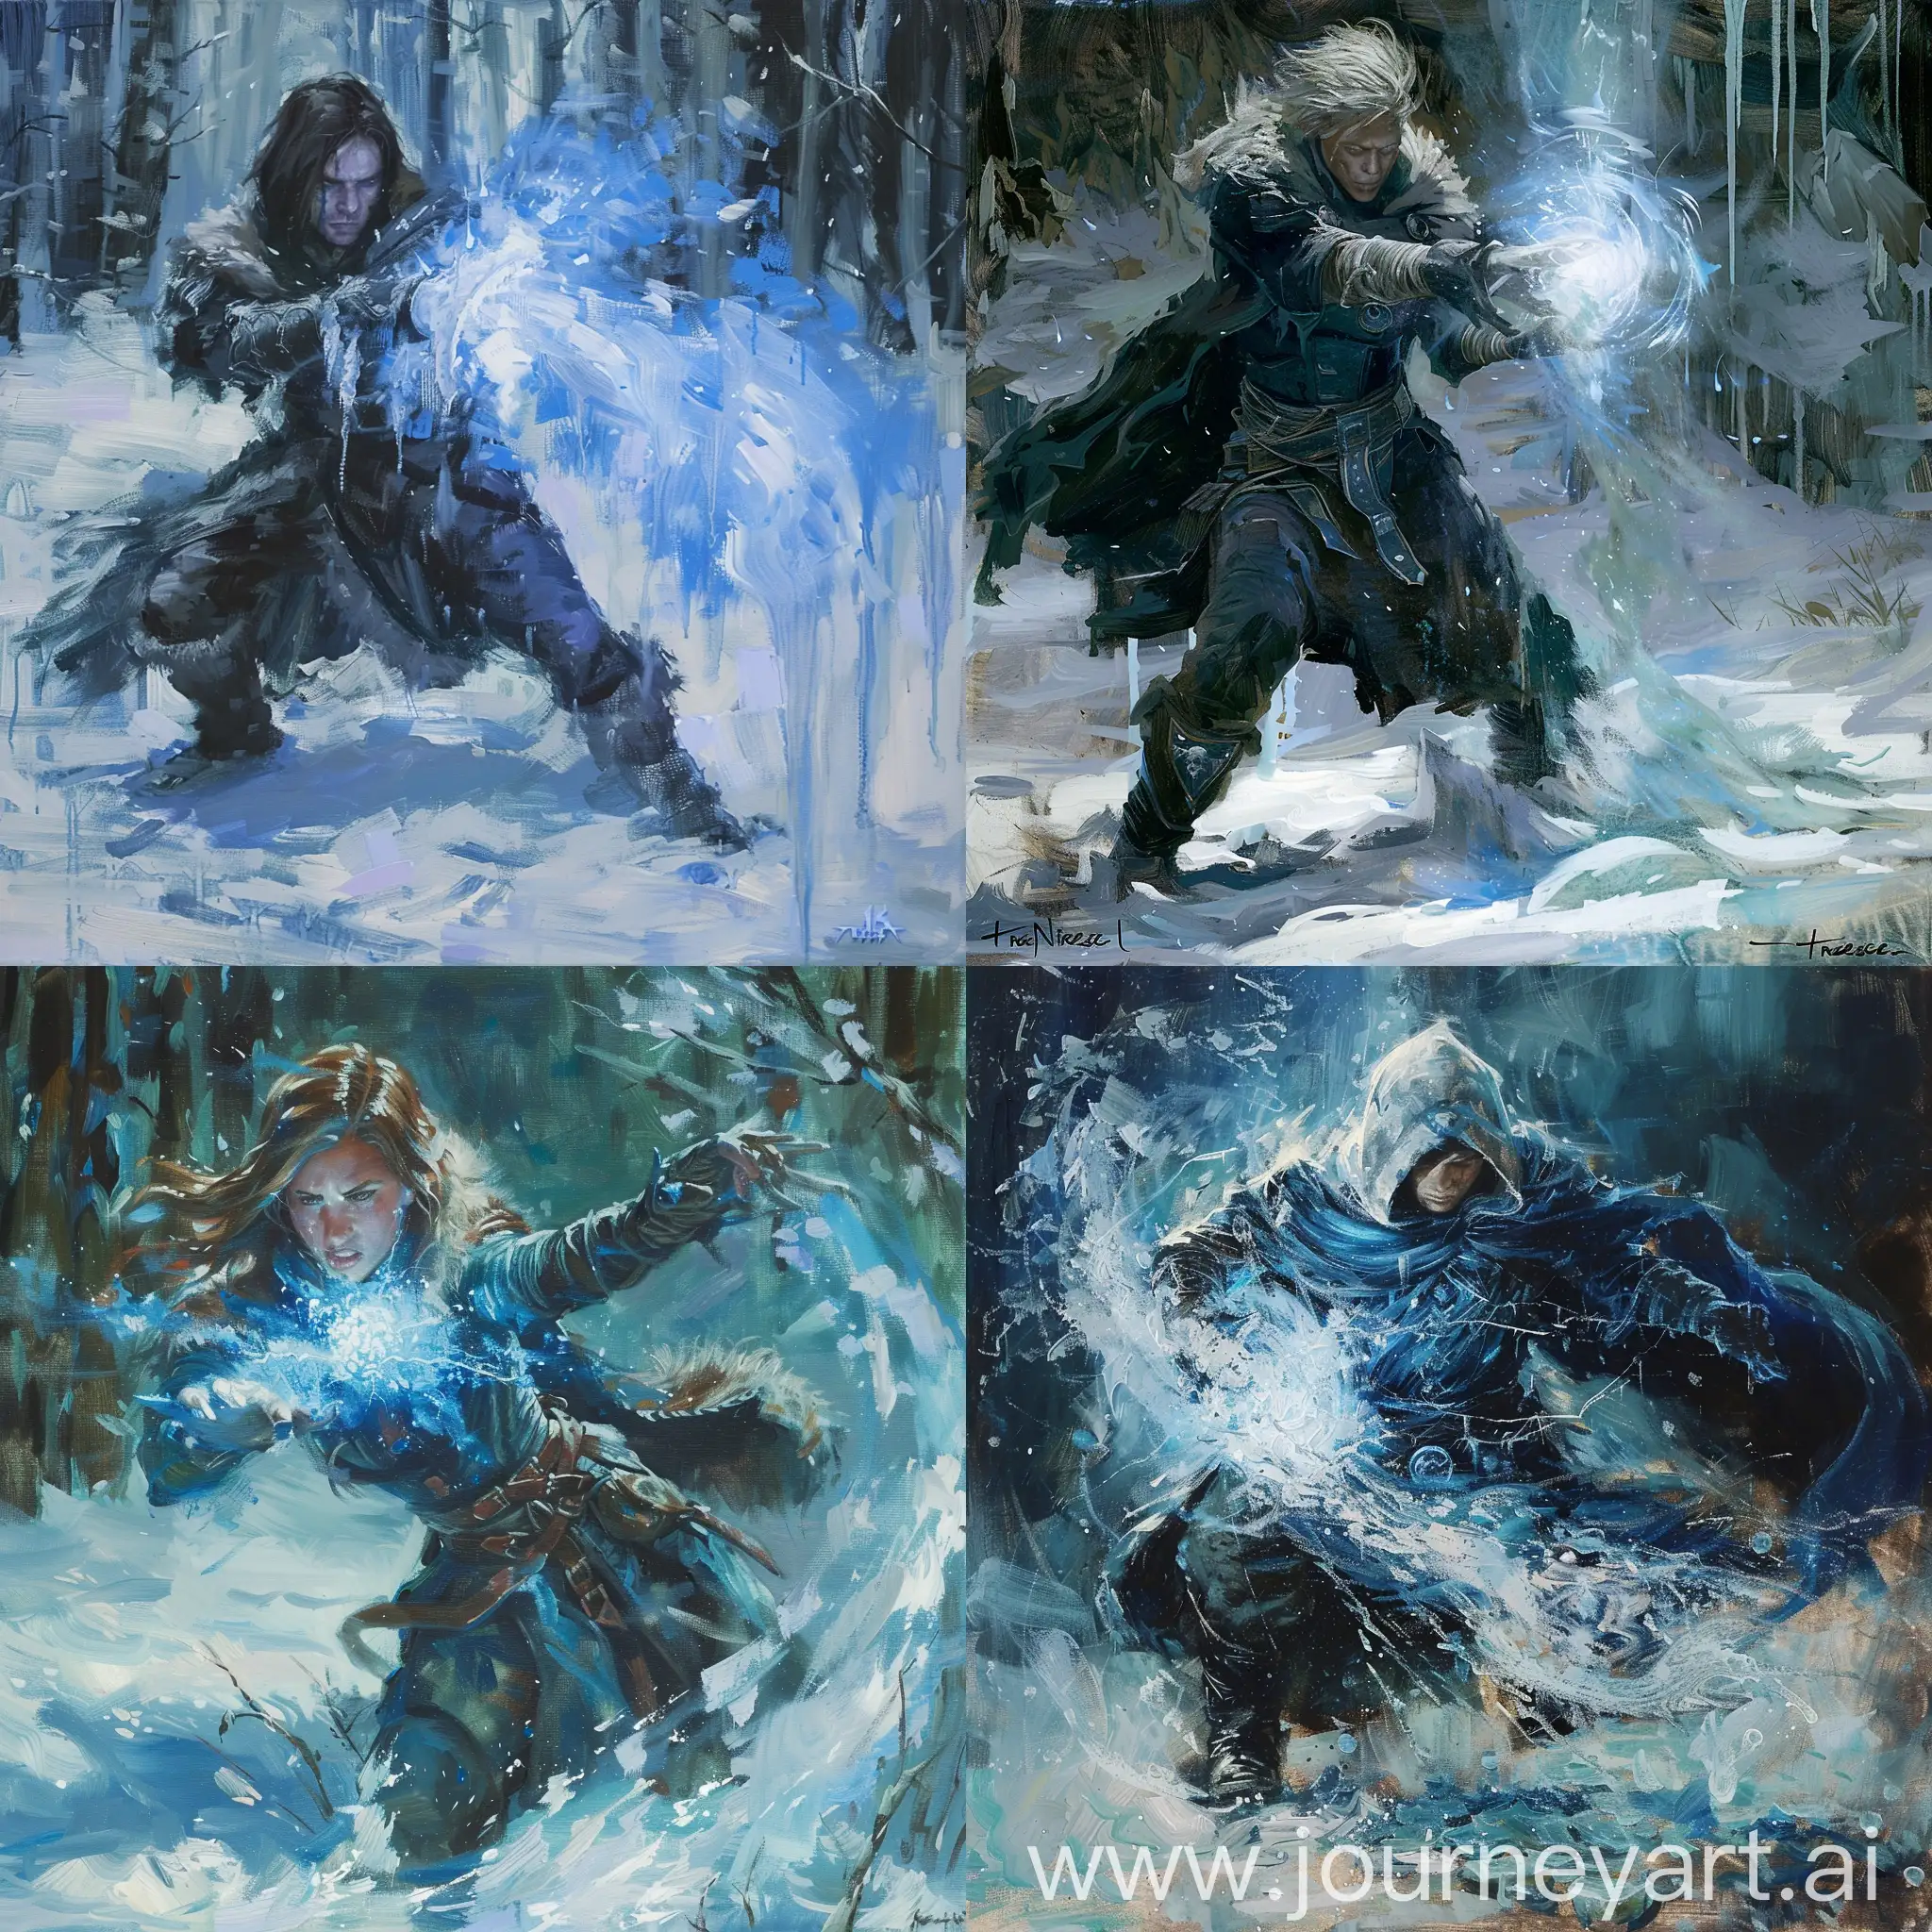 Battlemage using frost magic to freeze the ground.
In the art style of Terese Nielsen oil painting